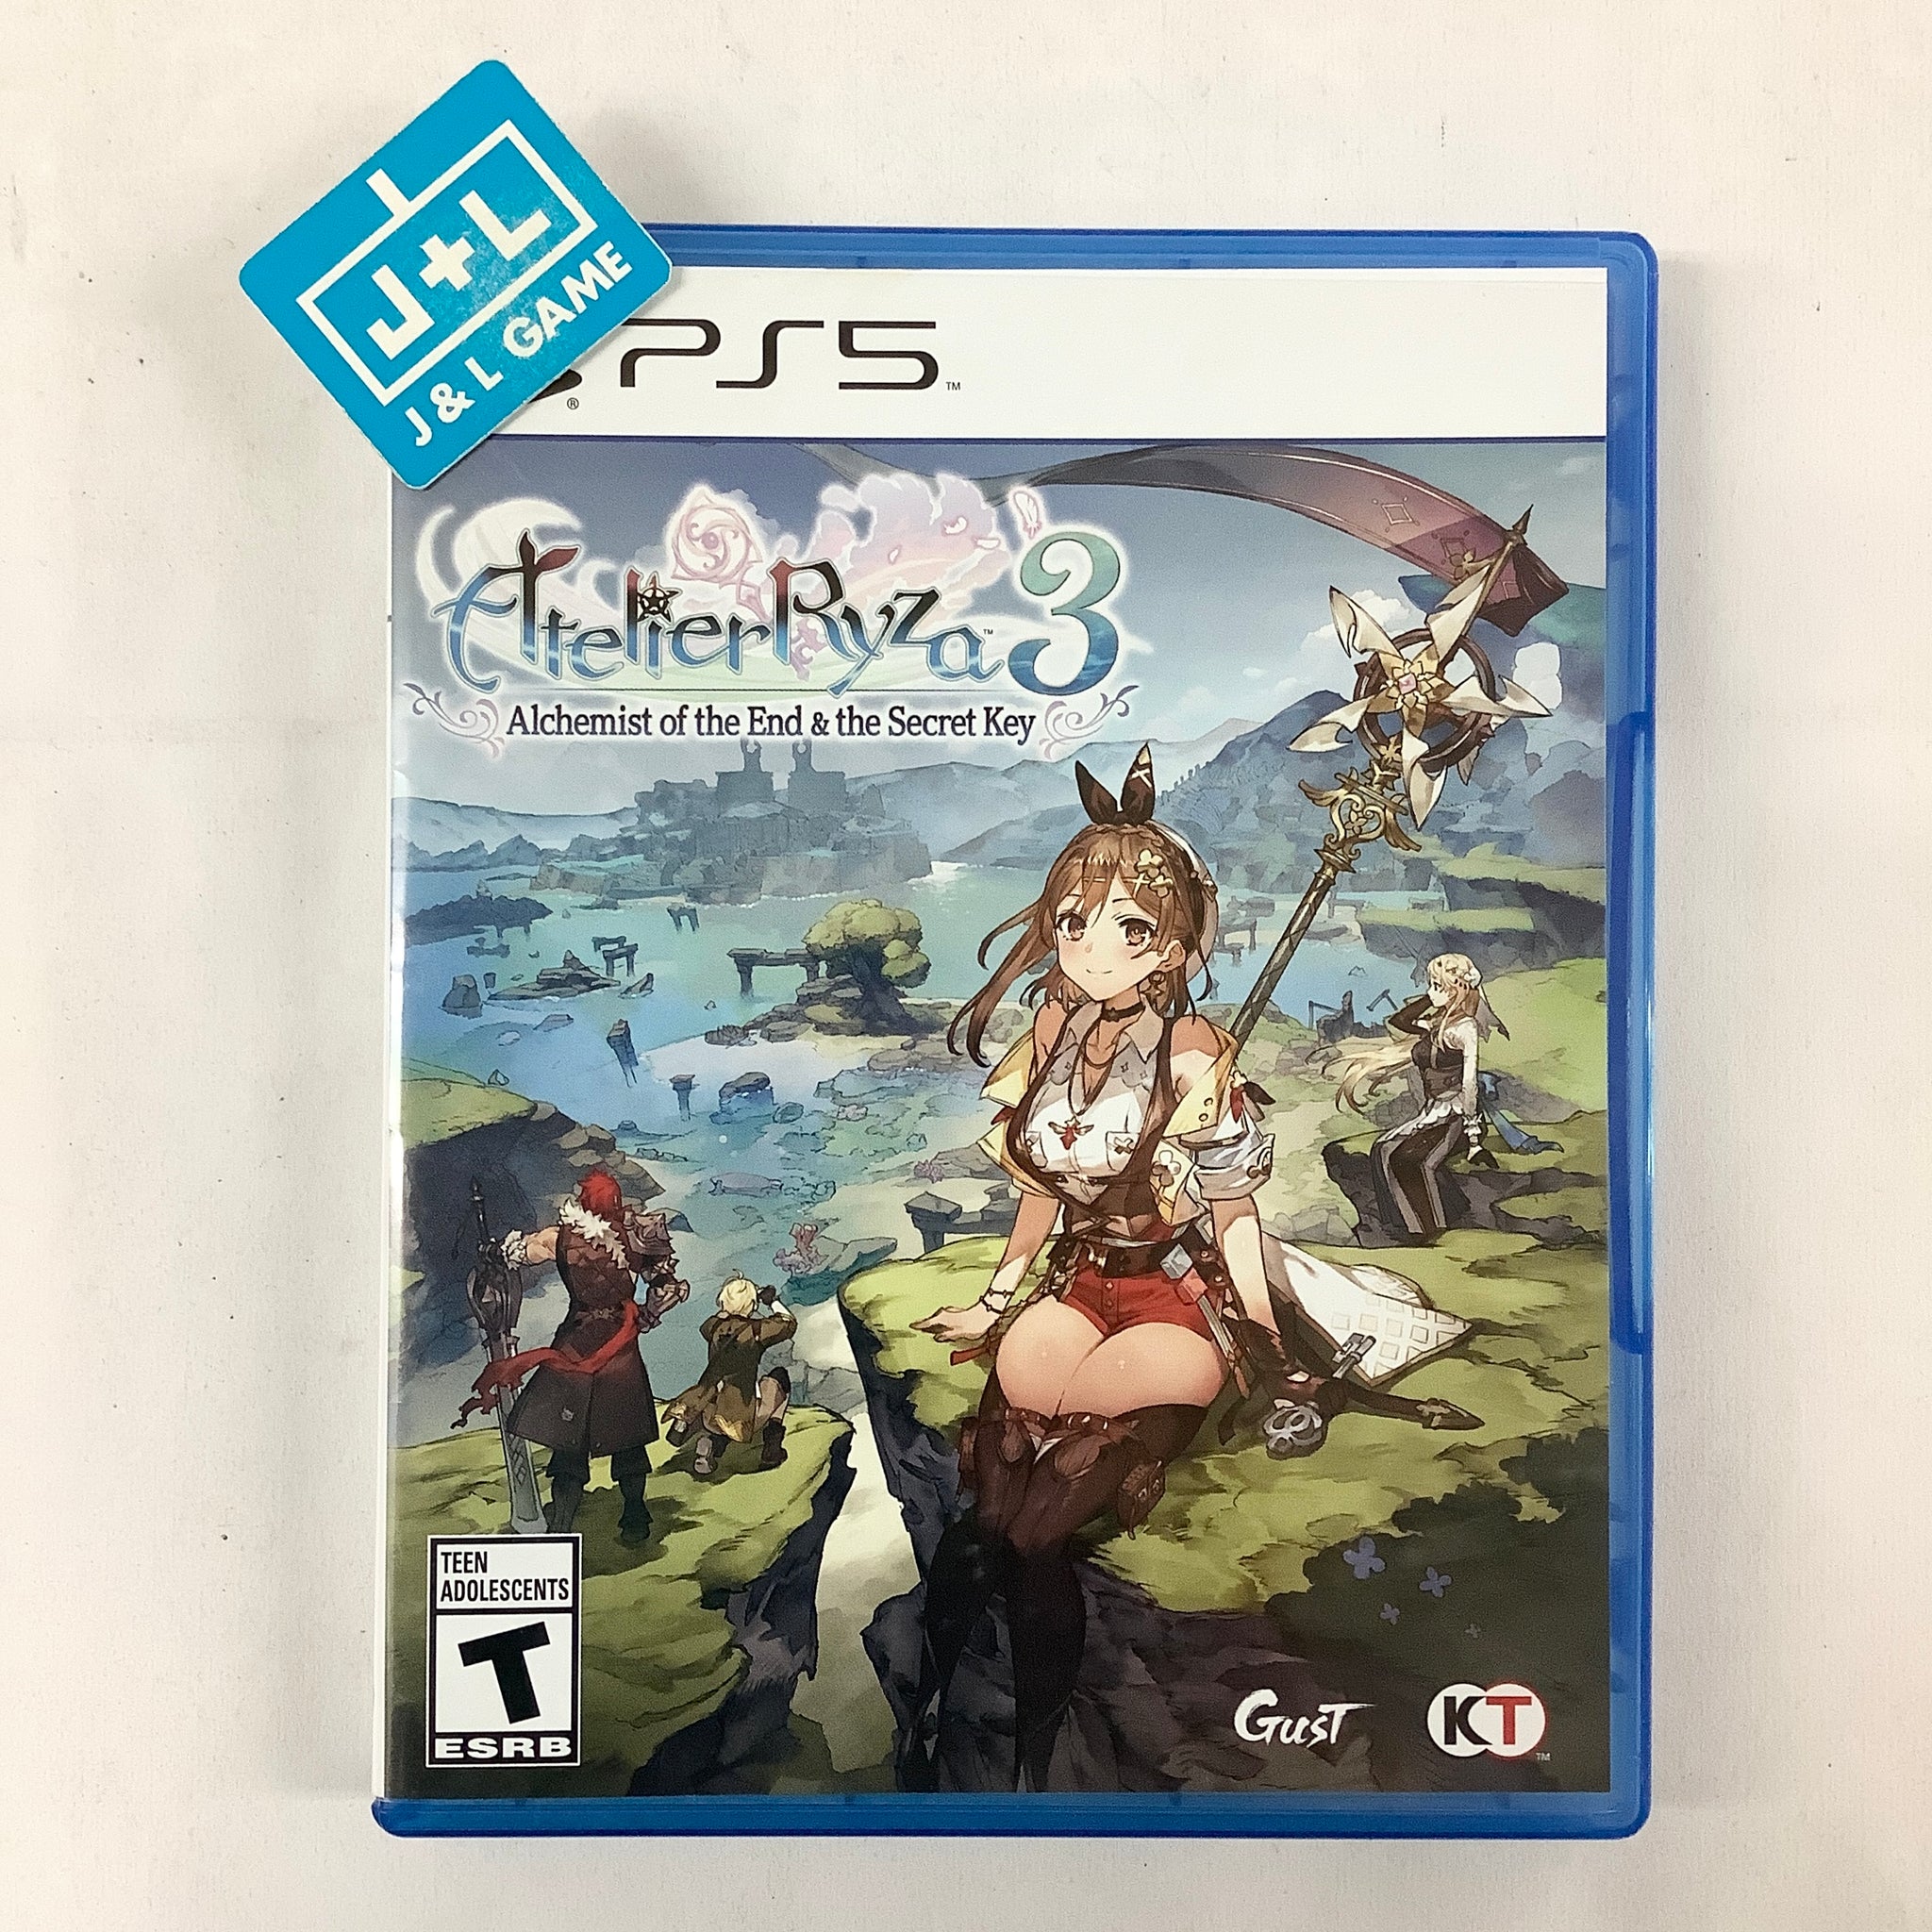 PS5 A Plague Tale Requiem (R3) (Used), Video Gaming, Video Games